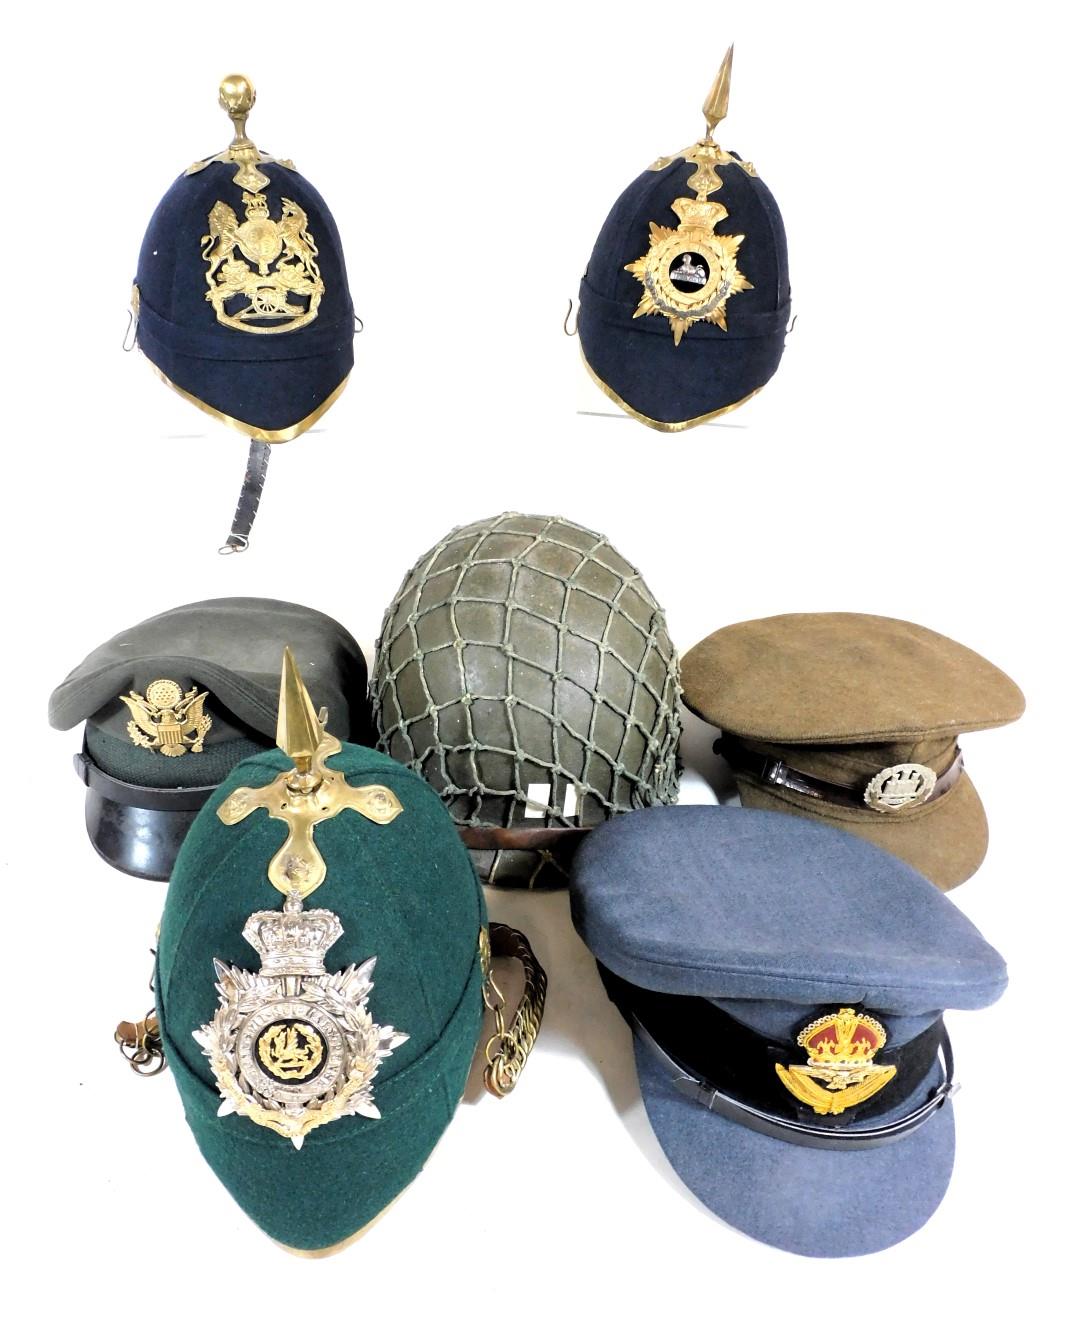 Three British Army helmets, with three regimental badges for the Royal Artillery, South Wales Border